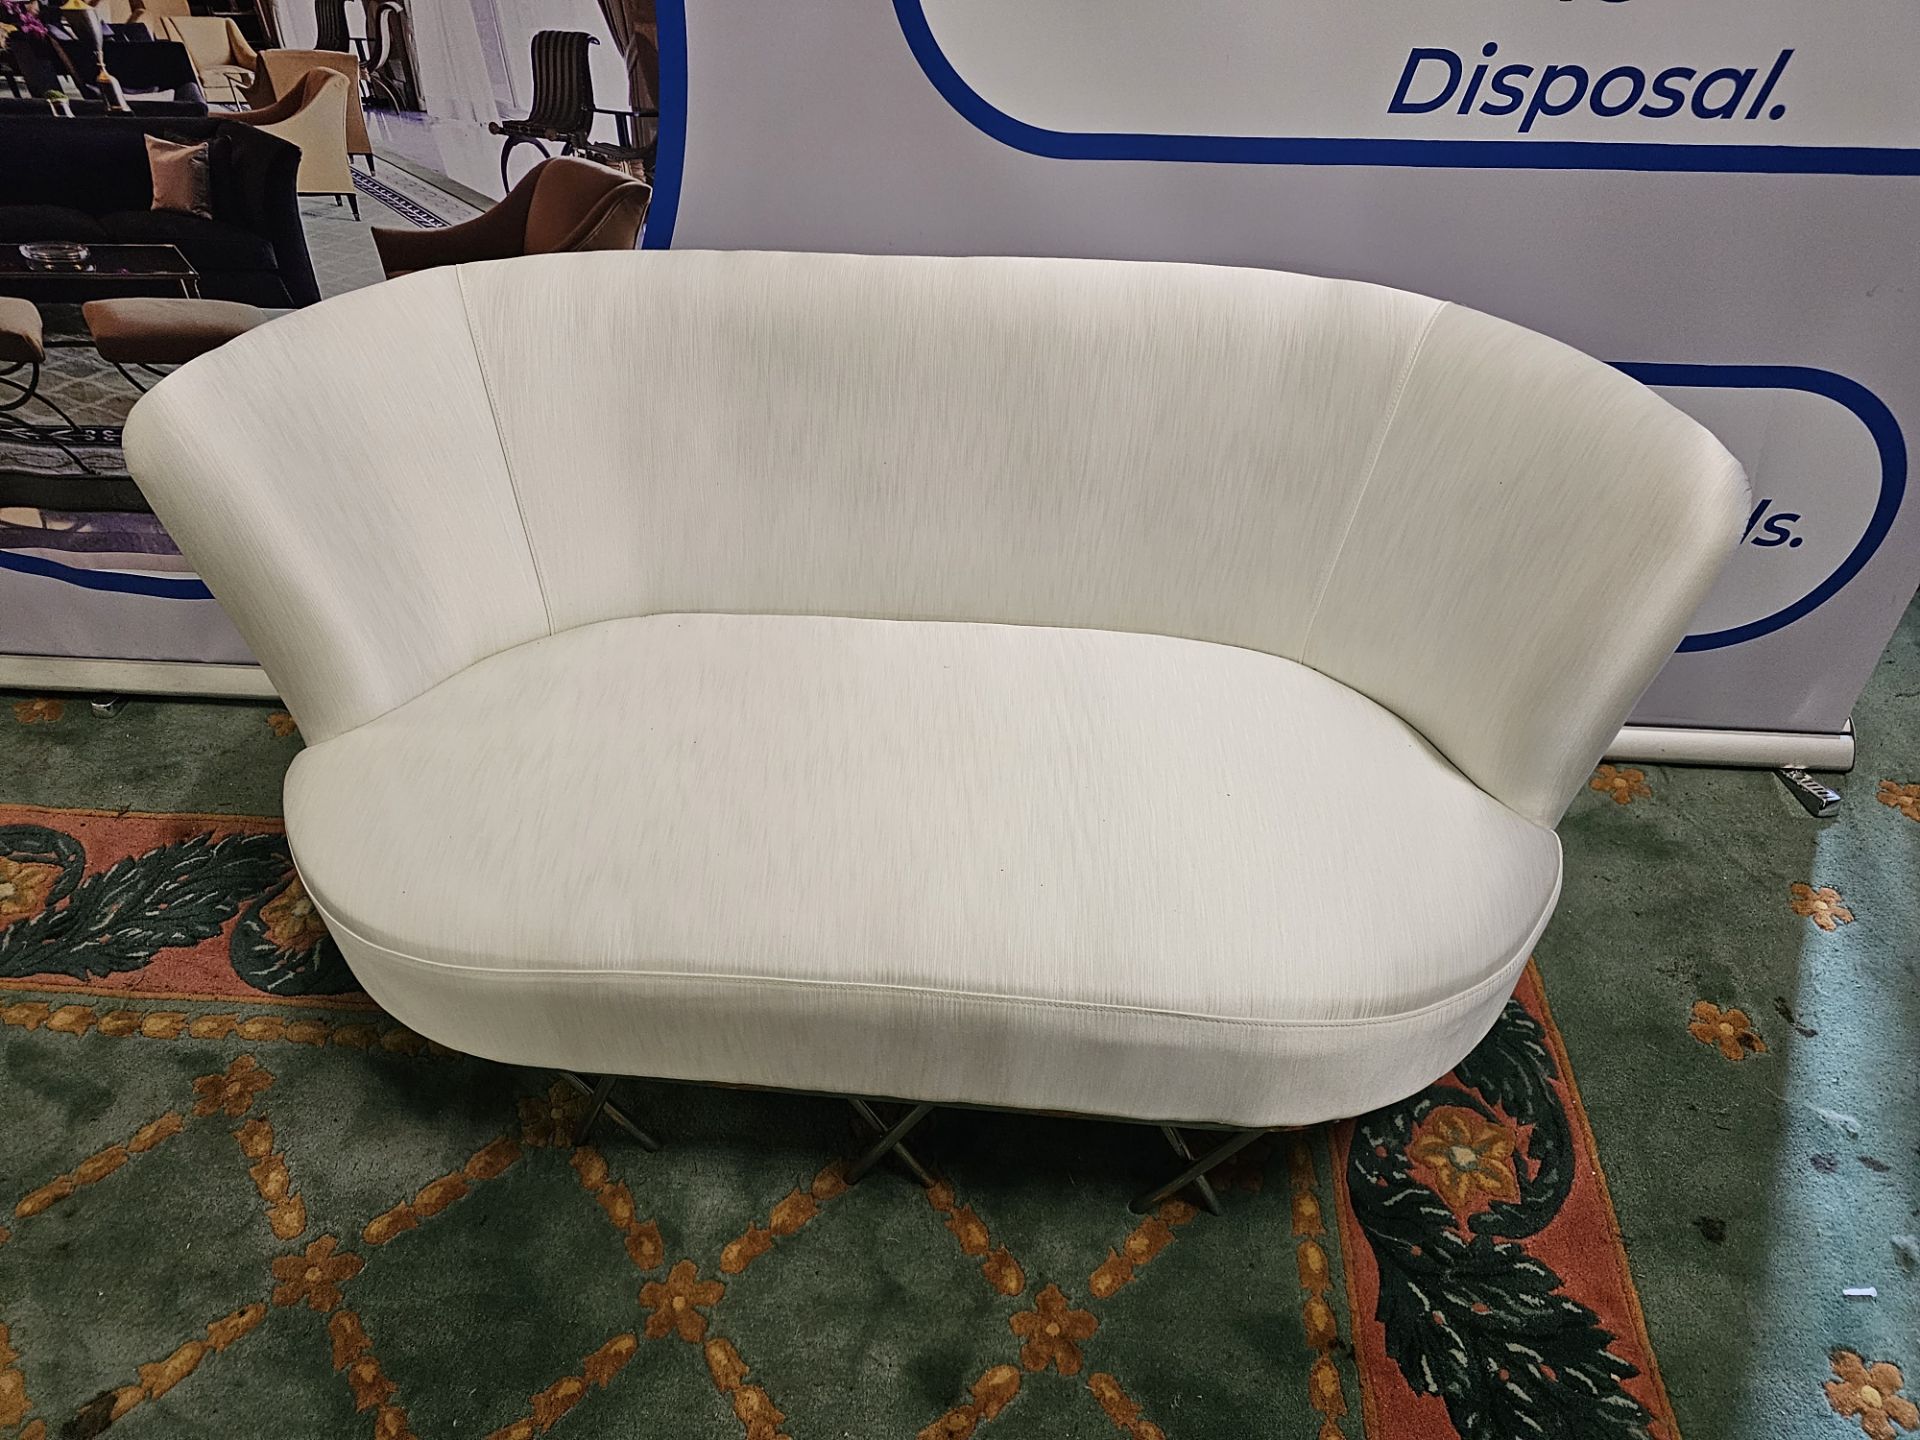 Two Seater Love Seat In A Shiny Oyster White Upholstery On Chrome Feet 155cm x 70cm x 73cm high - Image 2 of 10